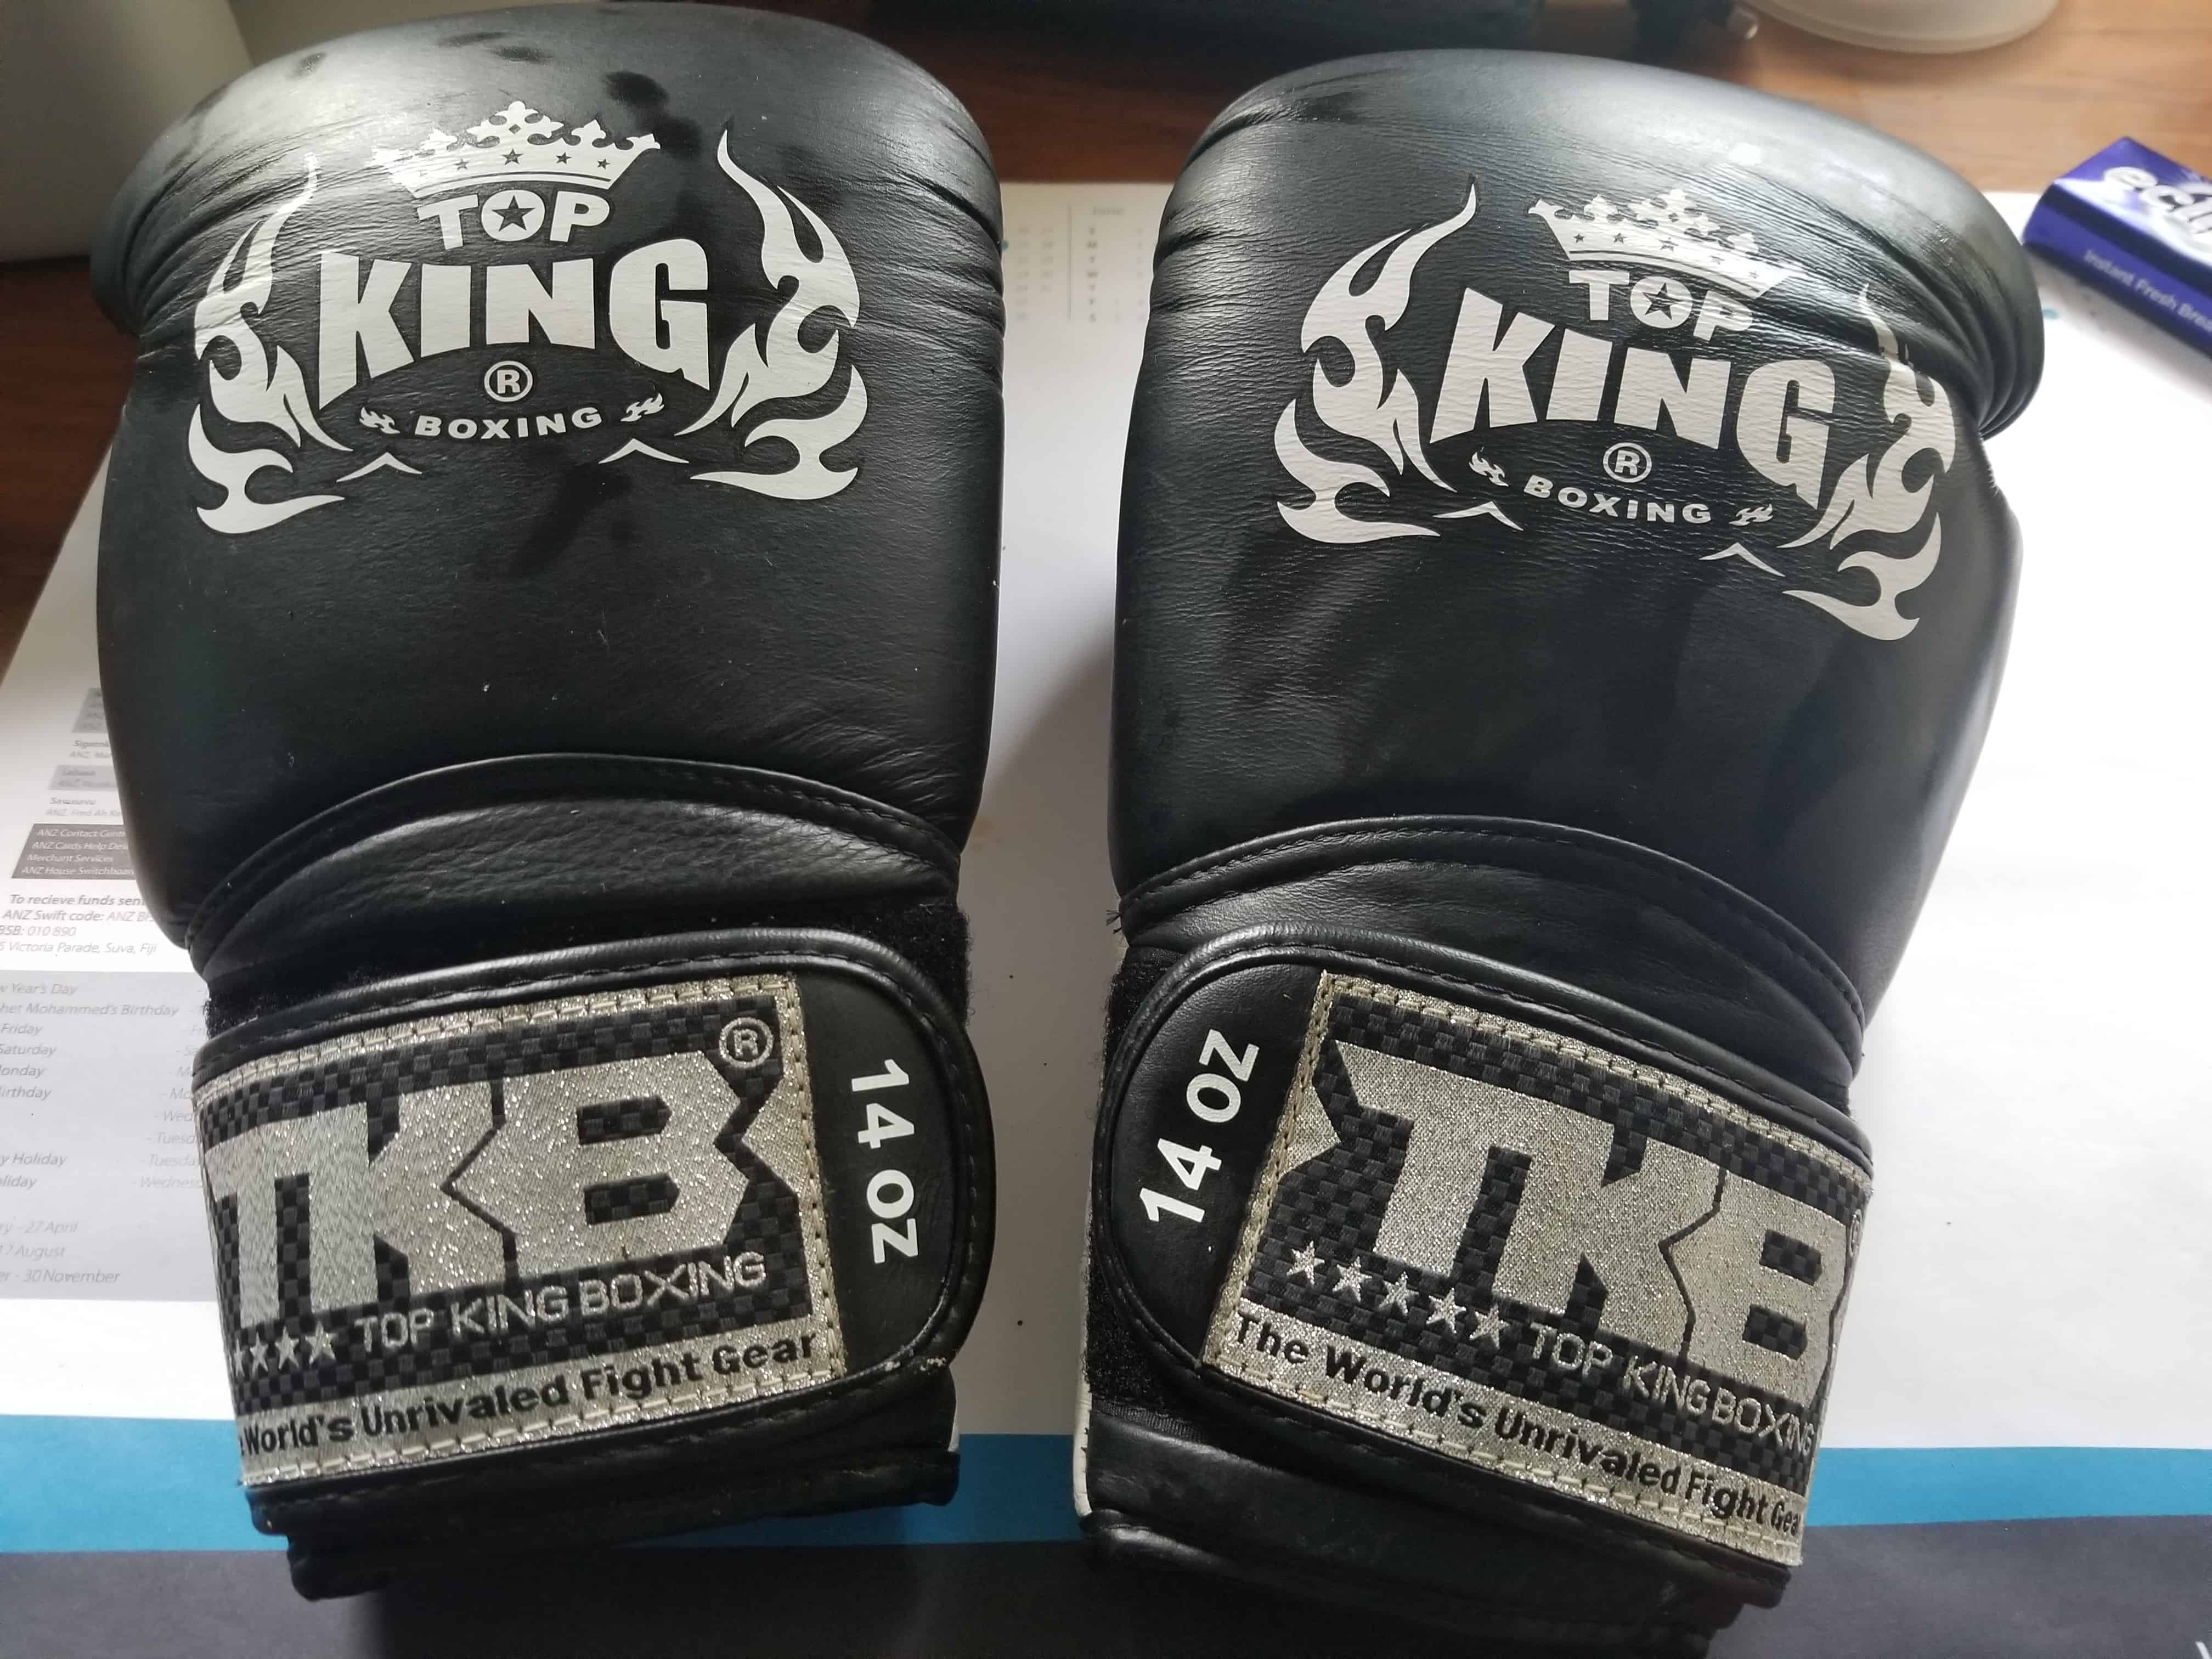 Which Muay Thai Glove Size Should I Choose?